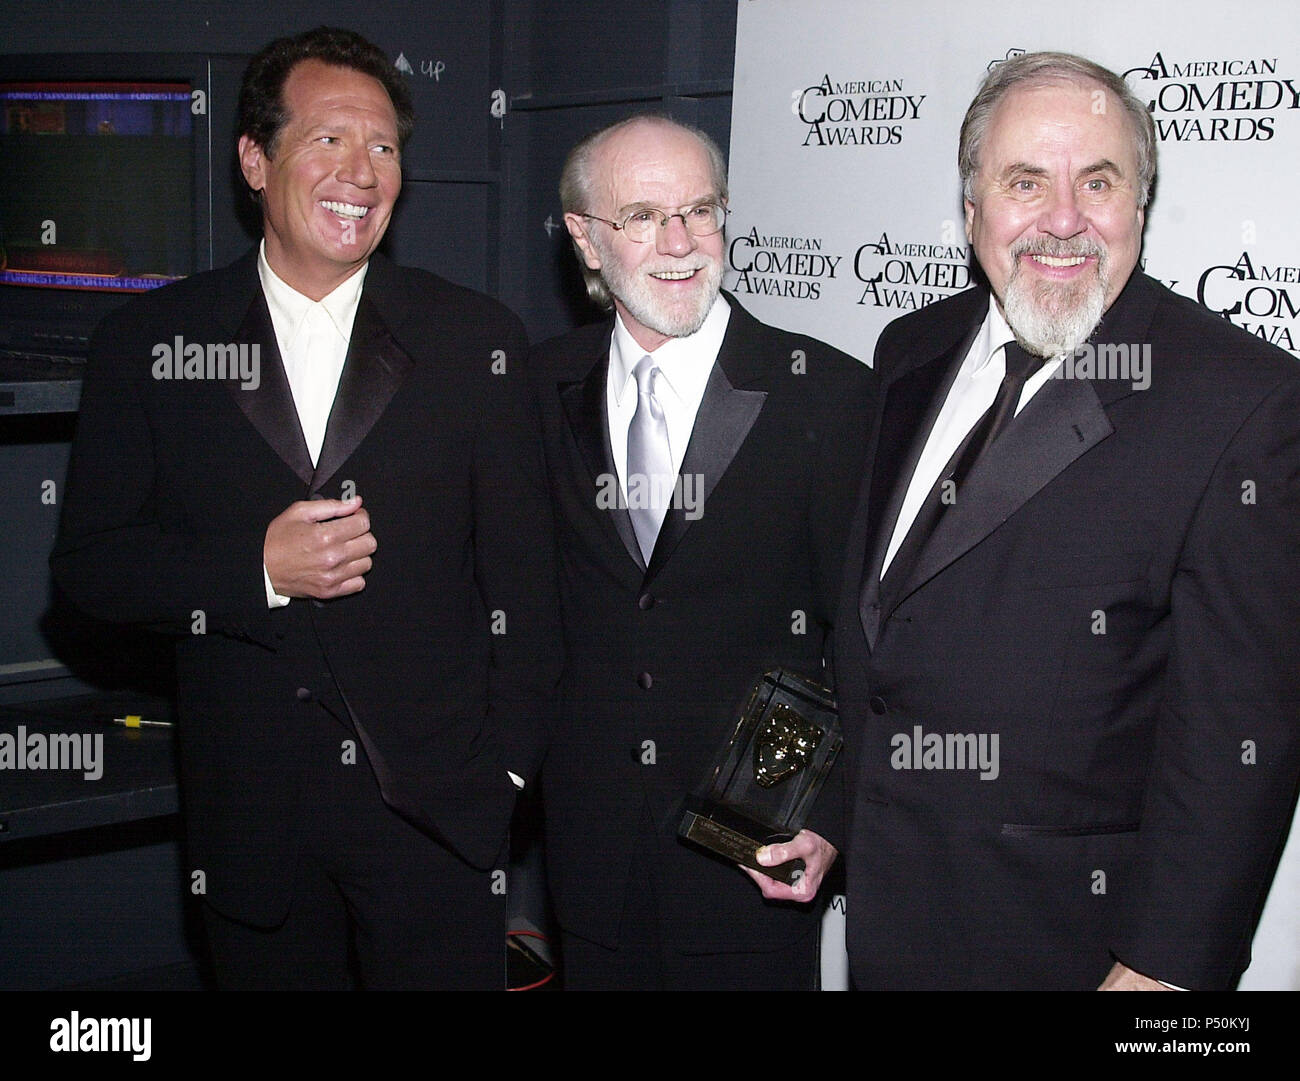 Gary Shandling, George Carlin and George Schlatter backstage at The 15th Annual American Comedy Awards held at Universal Studios, Los Angeles, CA. Sunday, April 22, 2001. The show will be airing on Comedy Central on Wednesday, April 25th 8 P.M. (ET/PT)          -            CarlinSchlatterShandling10.jpgCarlinSchlatterShandling10  Event in Hollywood Life - California, Red Carpet Event, USA, Film Industry, Celebrities, Photography, Bestof, Arts Culture and Entertainment, Topix Celebrities fashion, Best of, Hollywood Life, Event in Hollywood Life - California,  backstage trophy, Awards show, mov Stock Photo